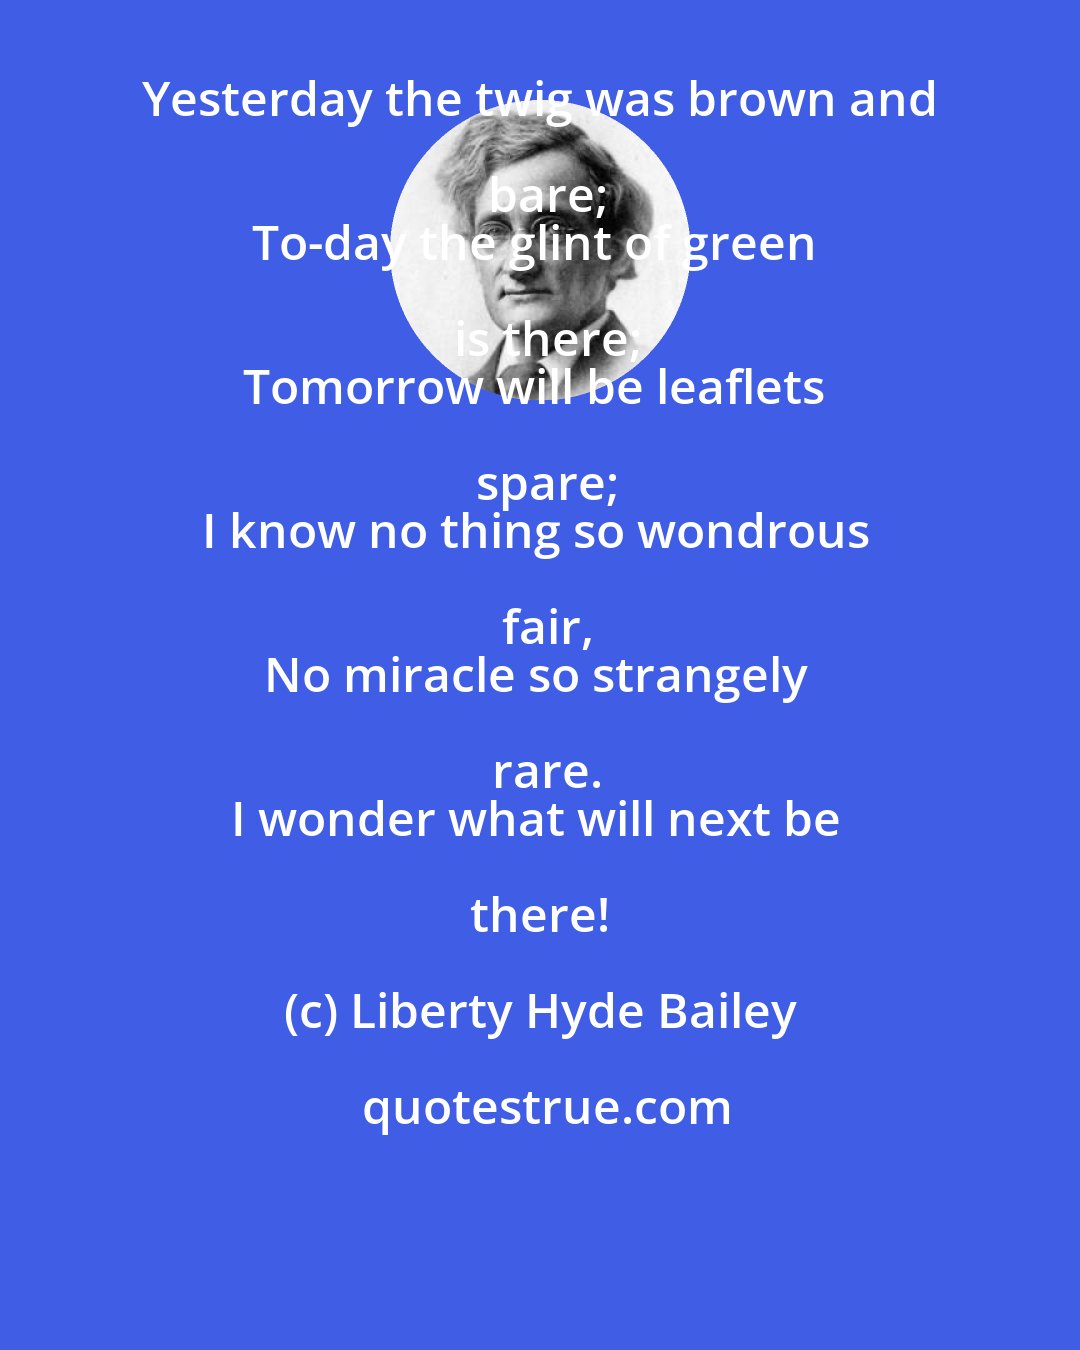 Liberty Hyde Bailey: Yesterday the twig was brown and bare;
To-day the glint of green is there;
Tomorrow will be leaflets spare;
I know no thing so wondrous fair,
No miracle so strangely rare.
I wonder what will next be there!